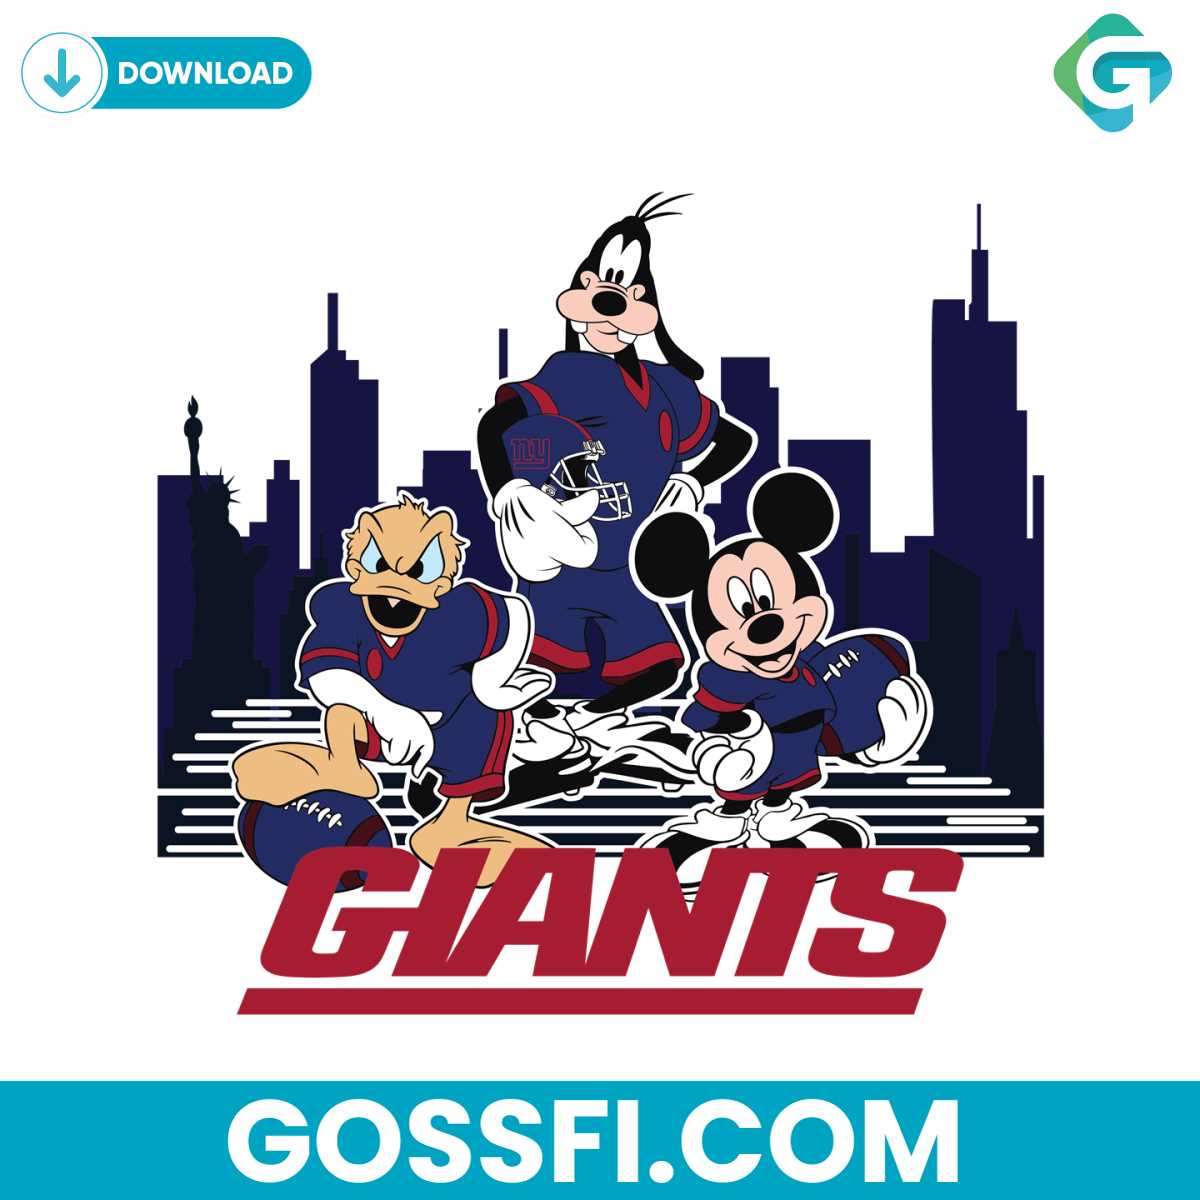 mickey-mouse-and-friends-play-football-giants-skyline-svg